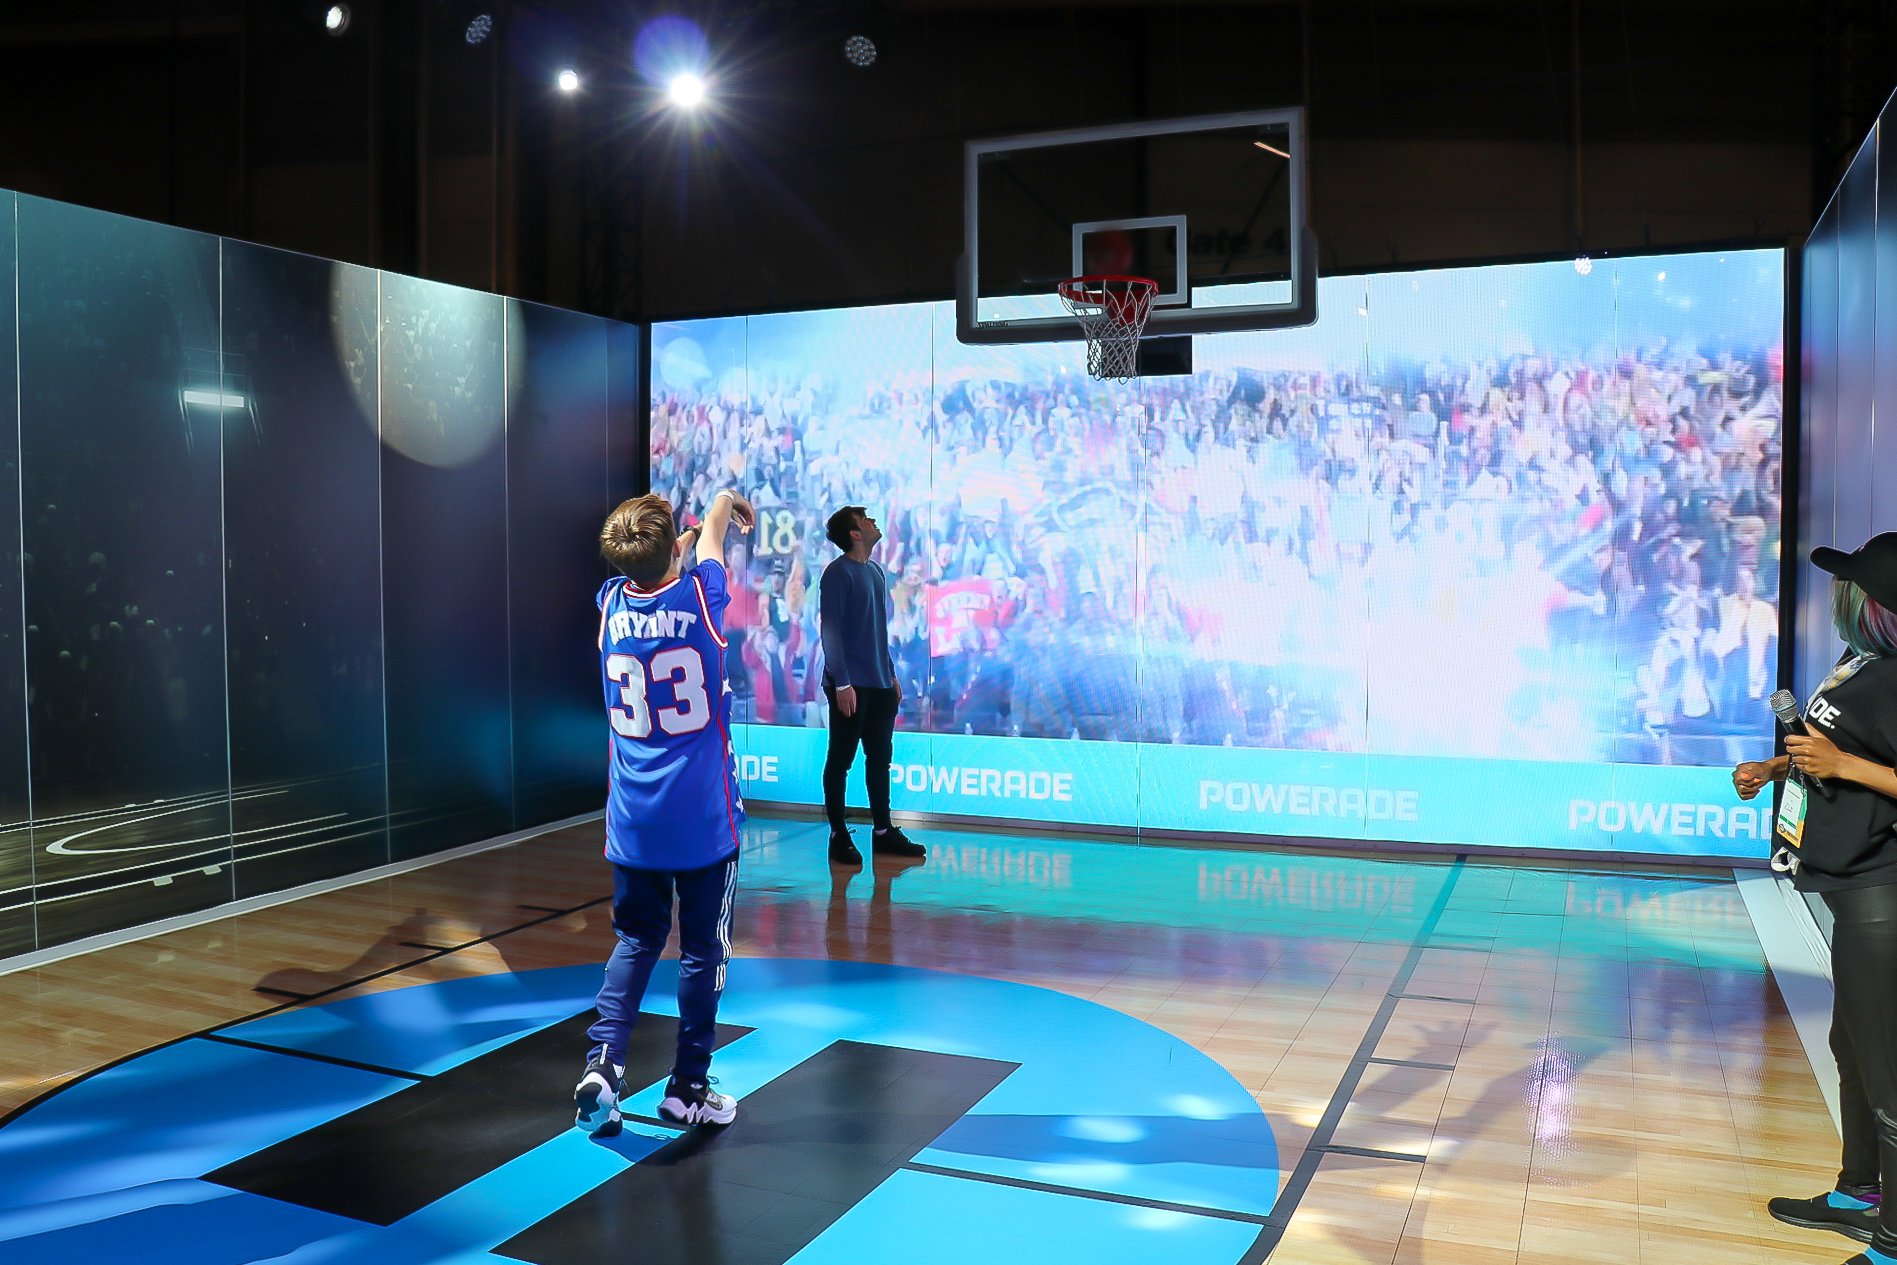 A boy wearing a McDonald's All Star jersey for Kobe Bryant shoots a basketball  from the free throw line.